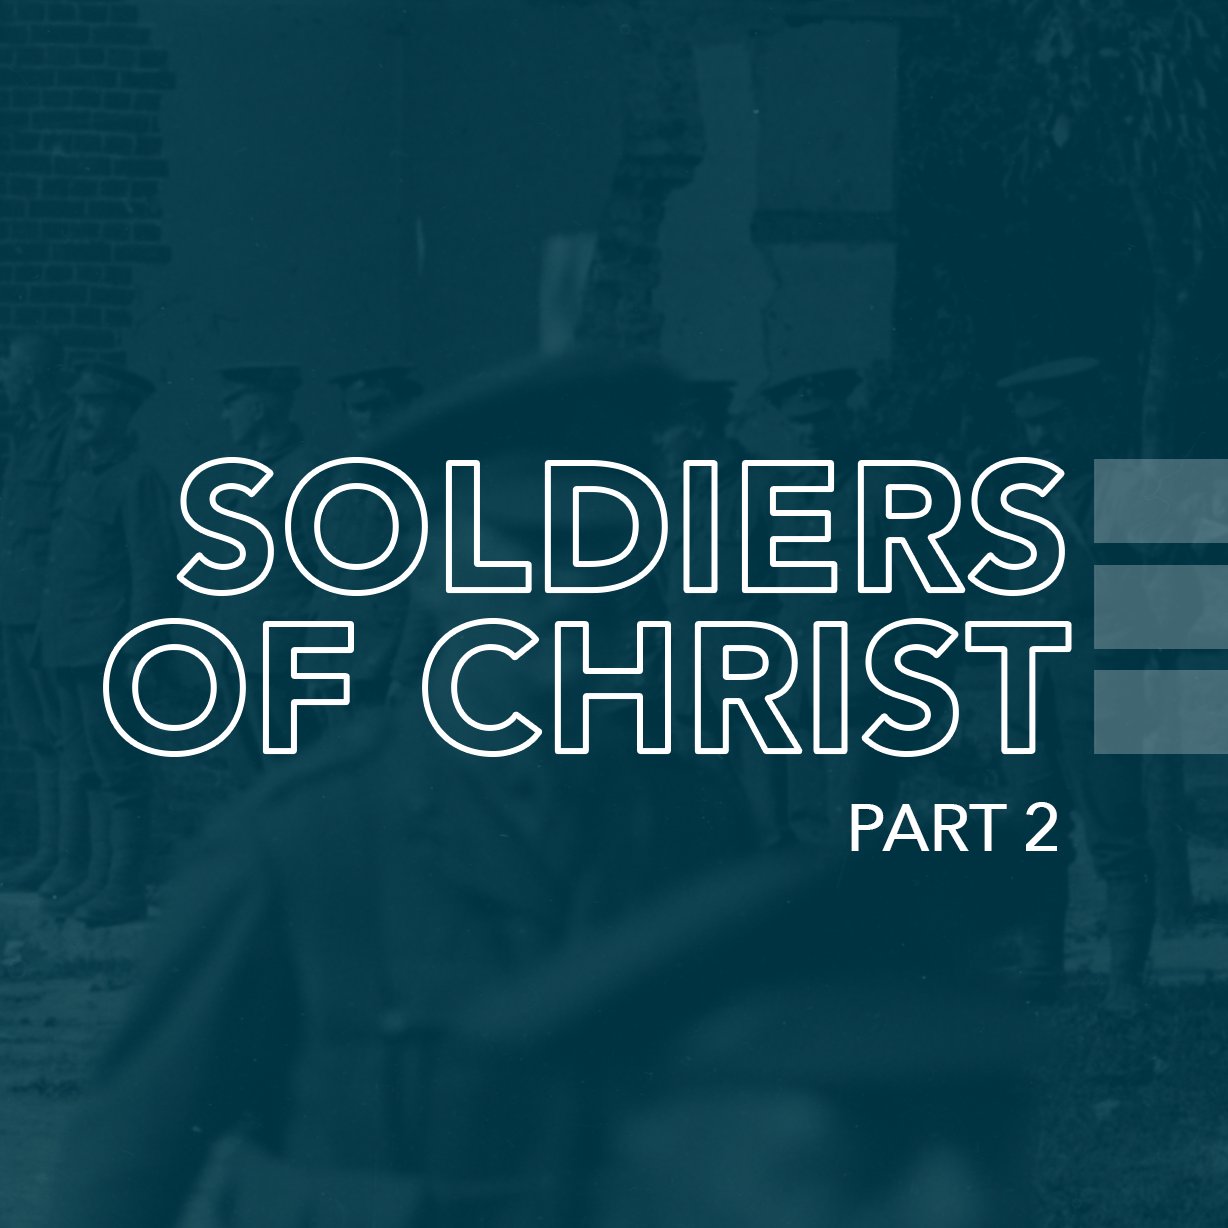 Soldiers of Christ, Part 2